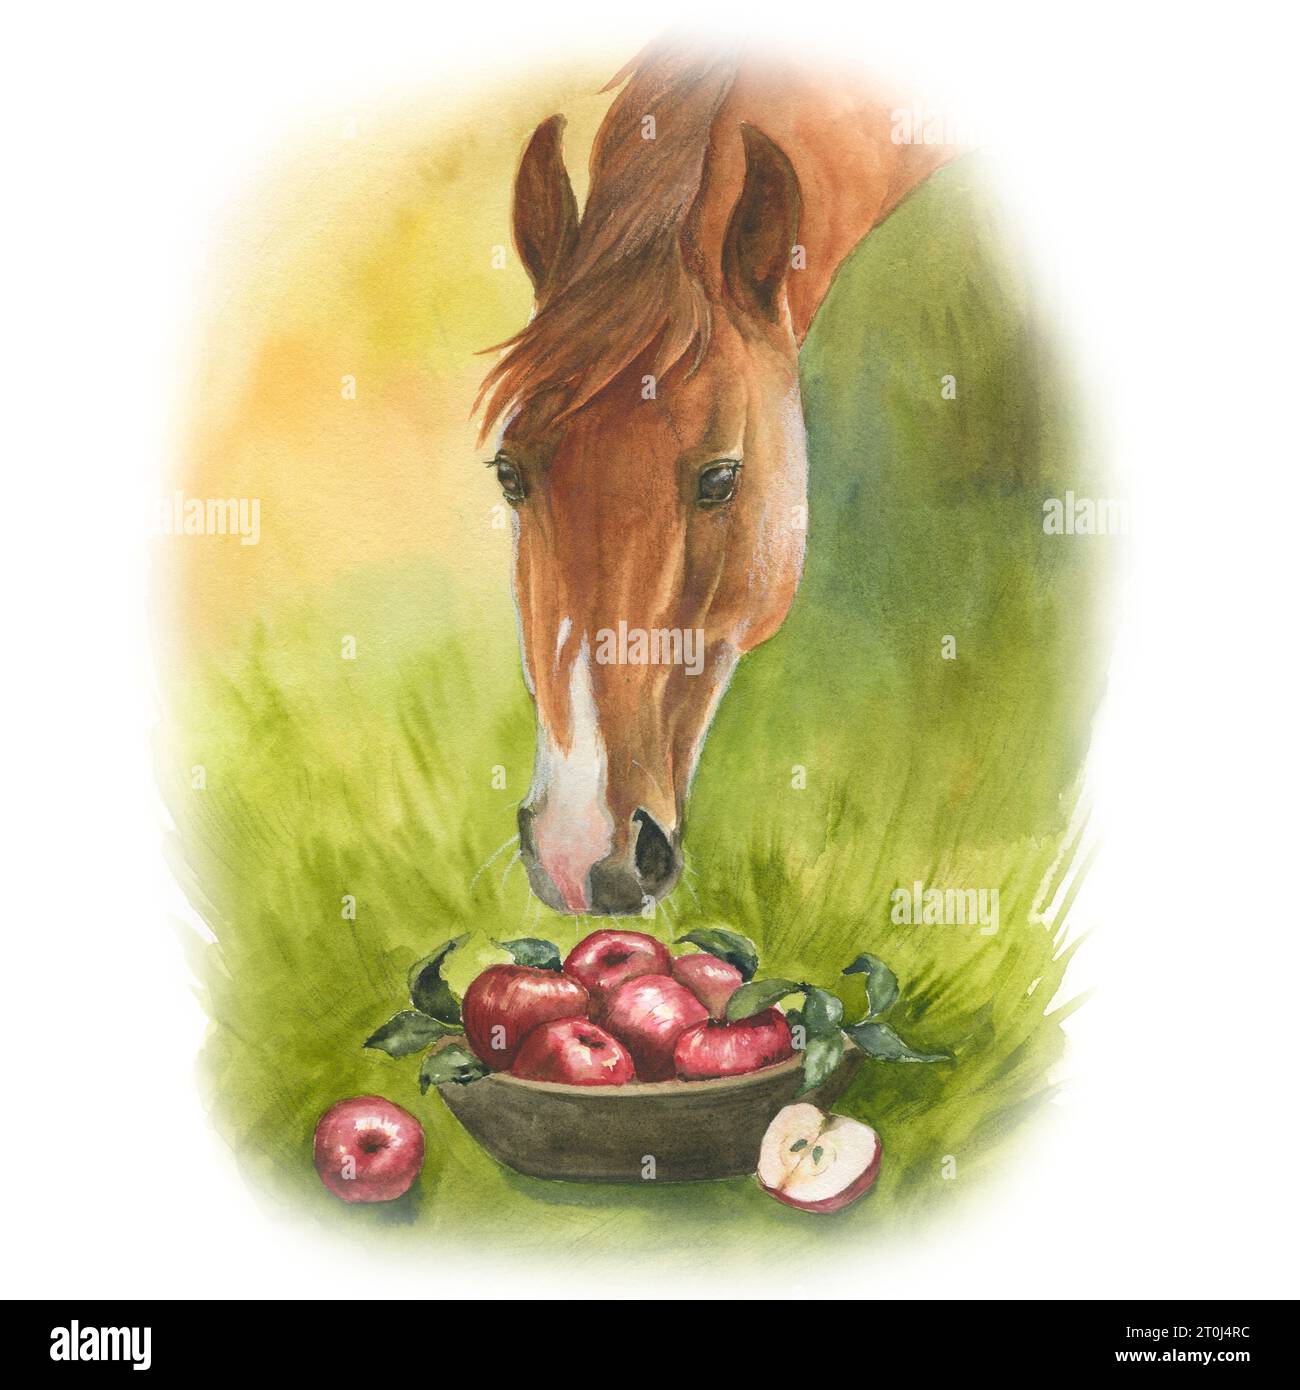 Watercolor illustration portrait red horse eating apples from basket Stock Photo